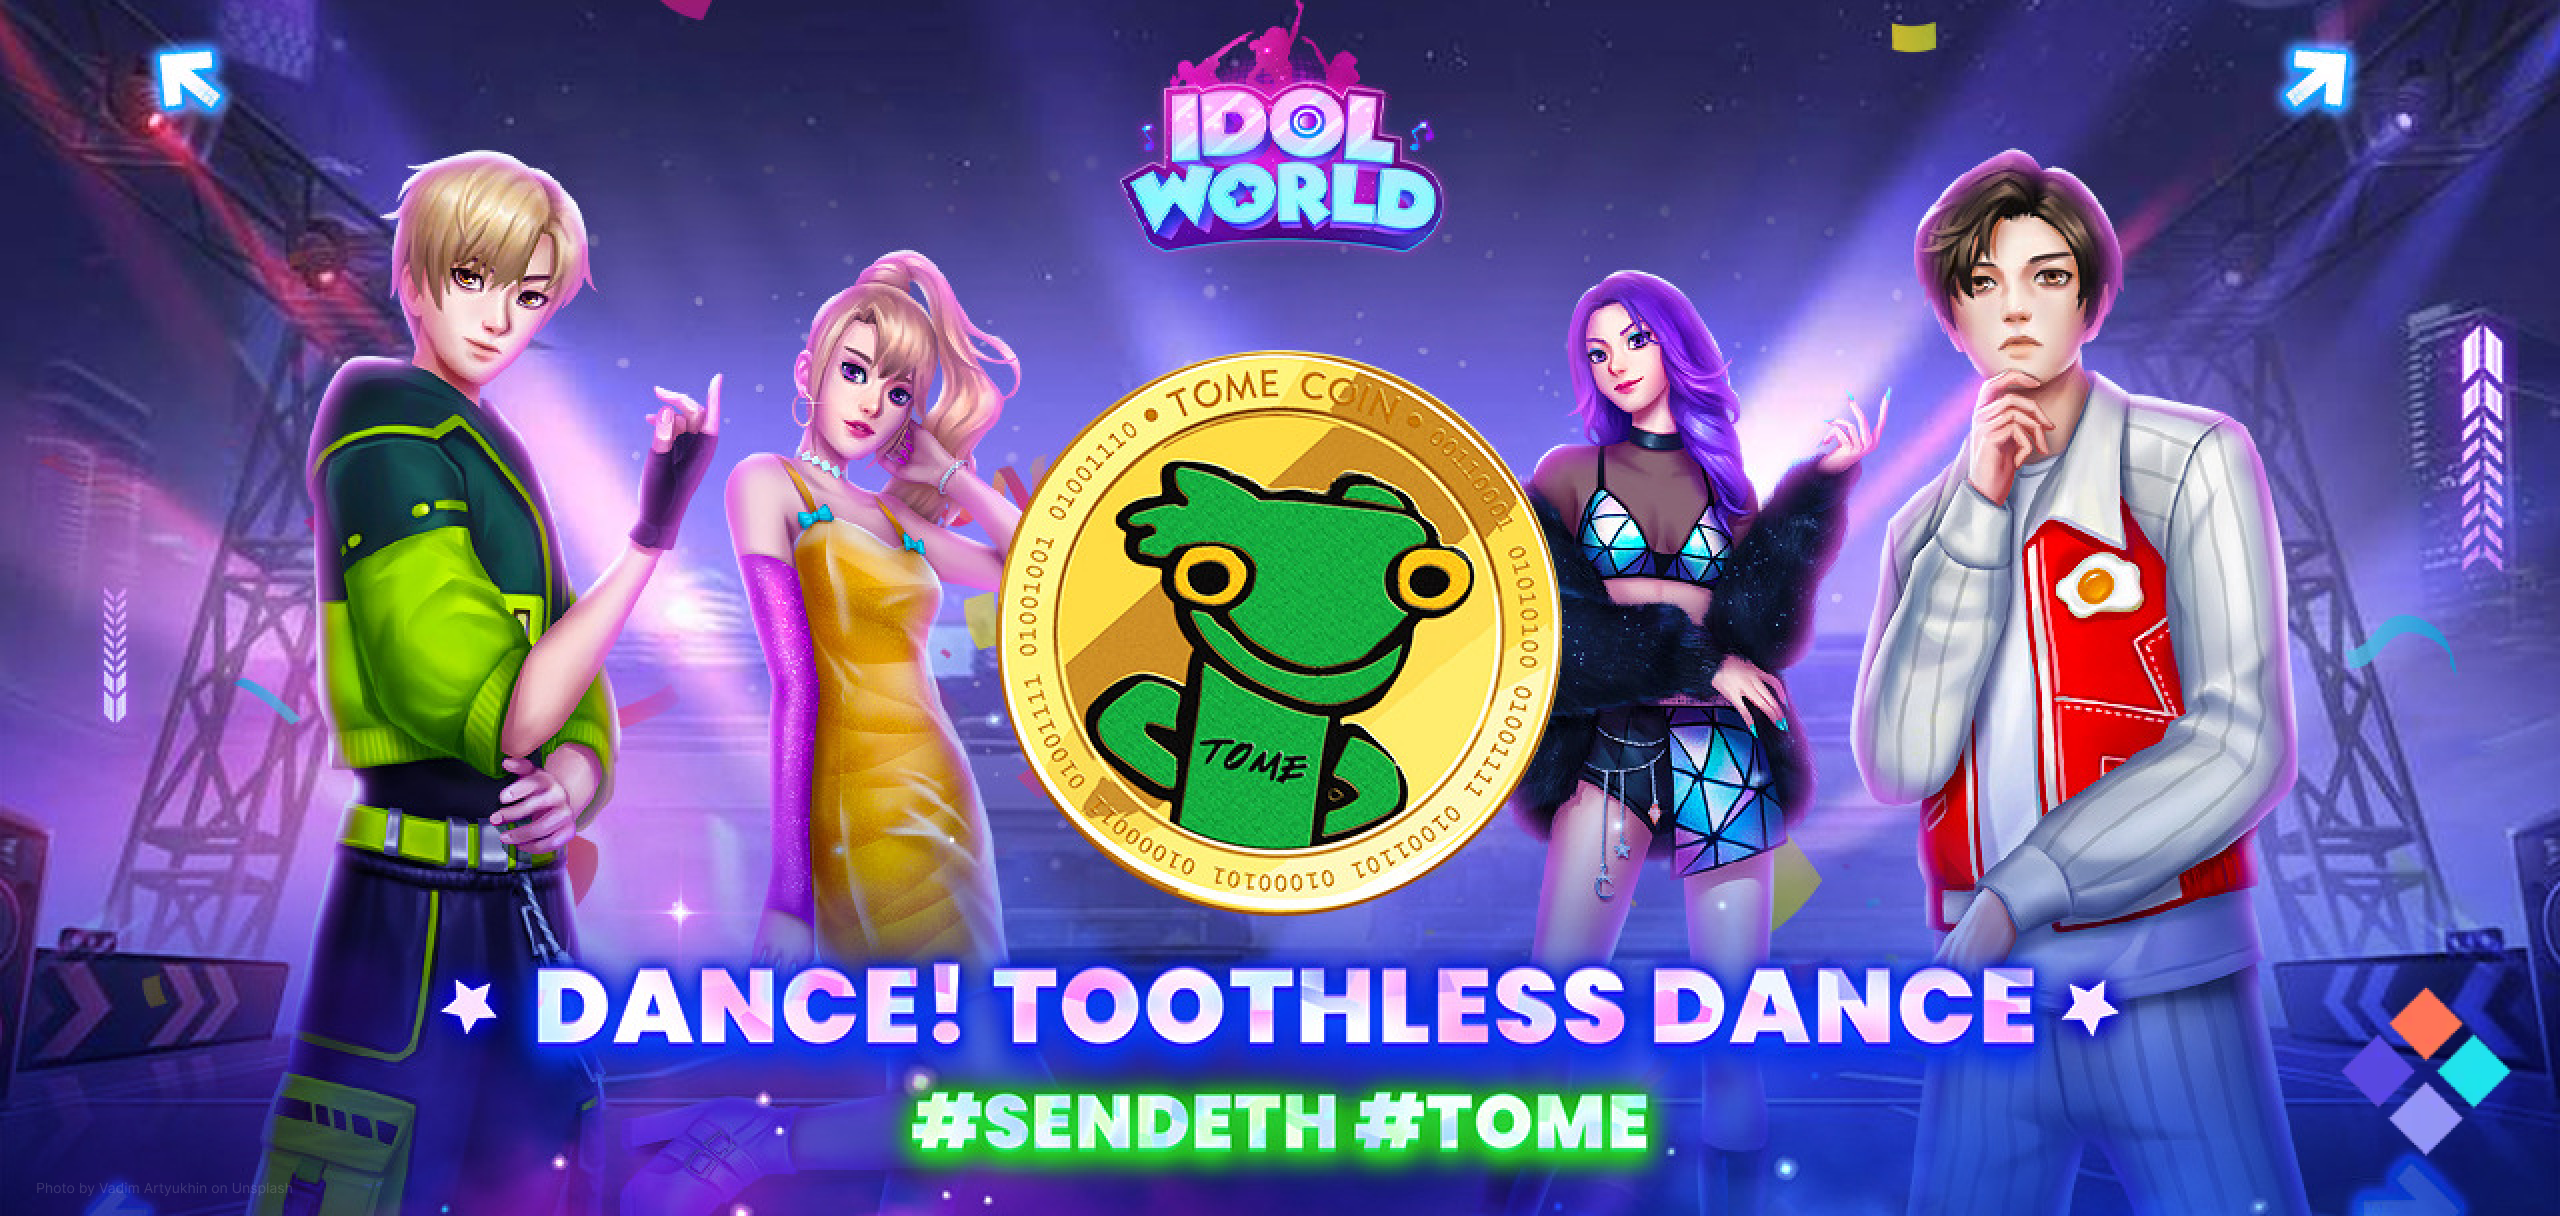 Idol World Announces NFT and $TOME Meme Coin Integration